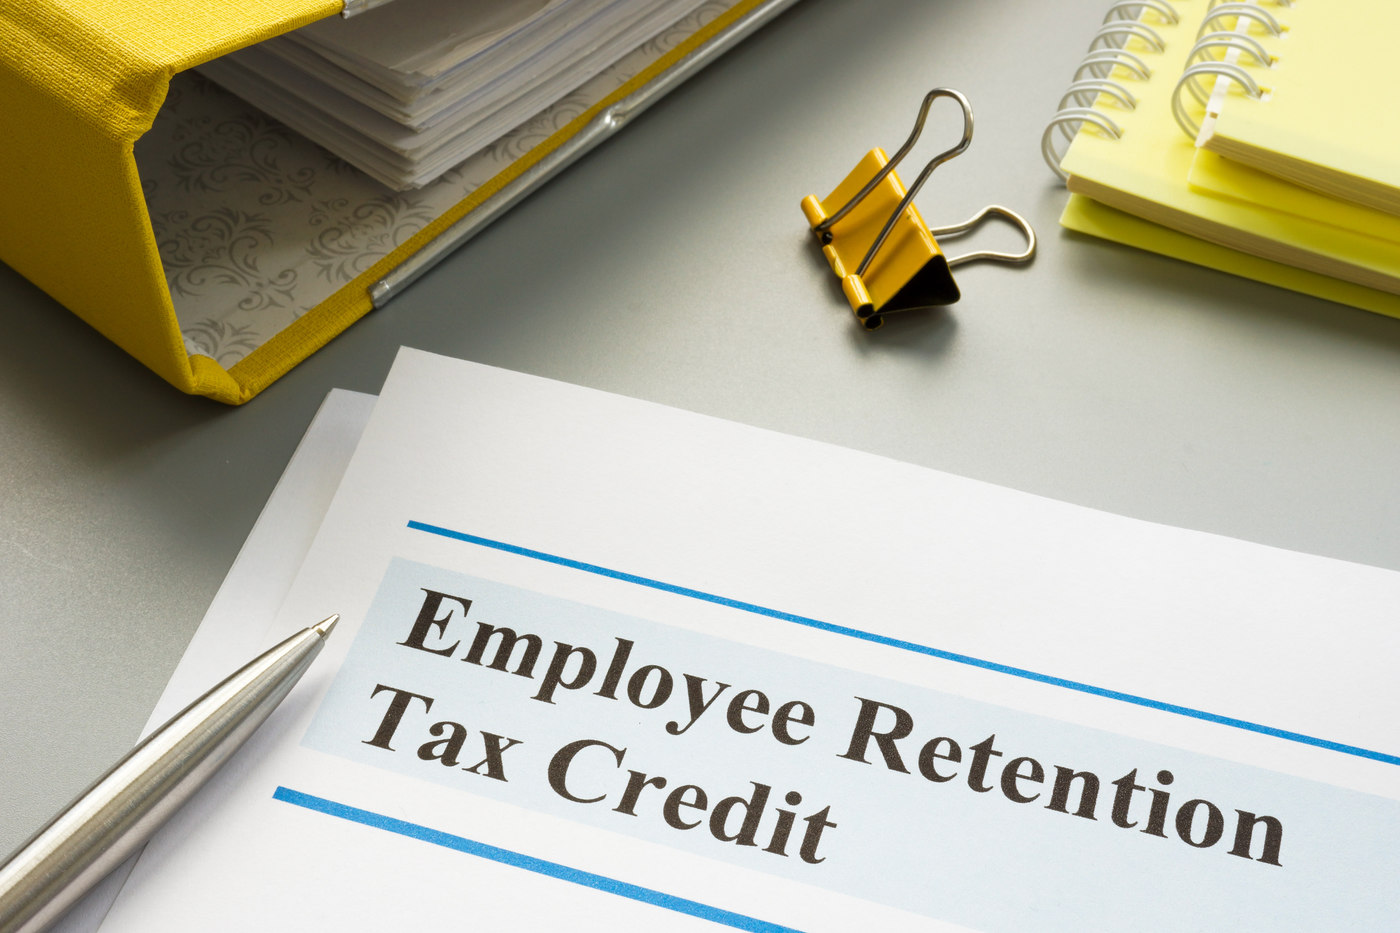 employee retention credit qualifications and hcm erc